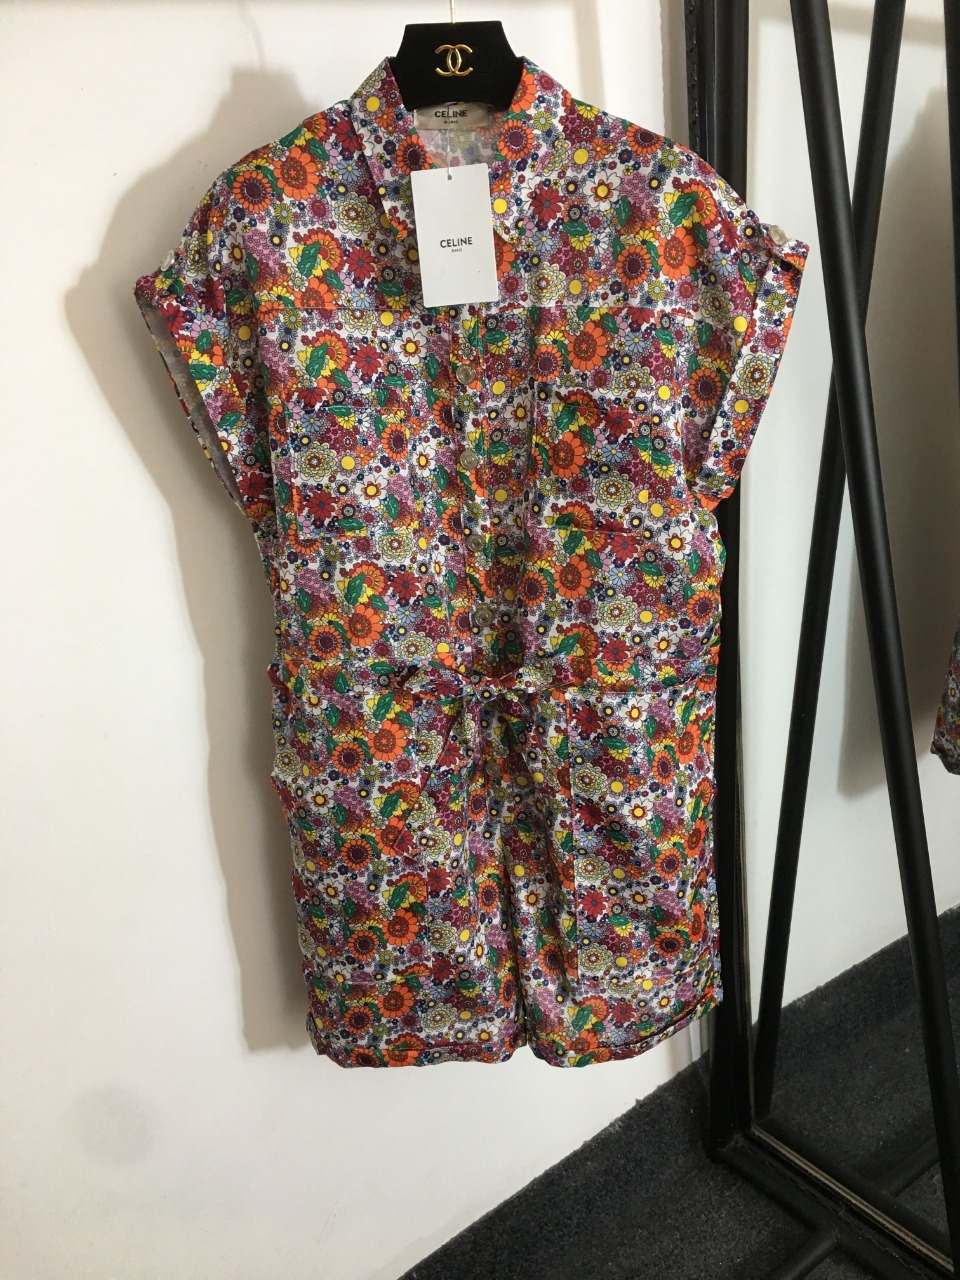 Fashionable overalls from short sleeves and flower print